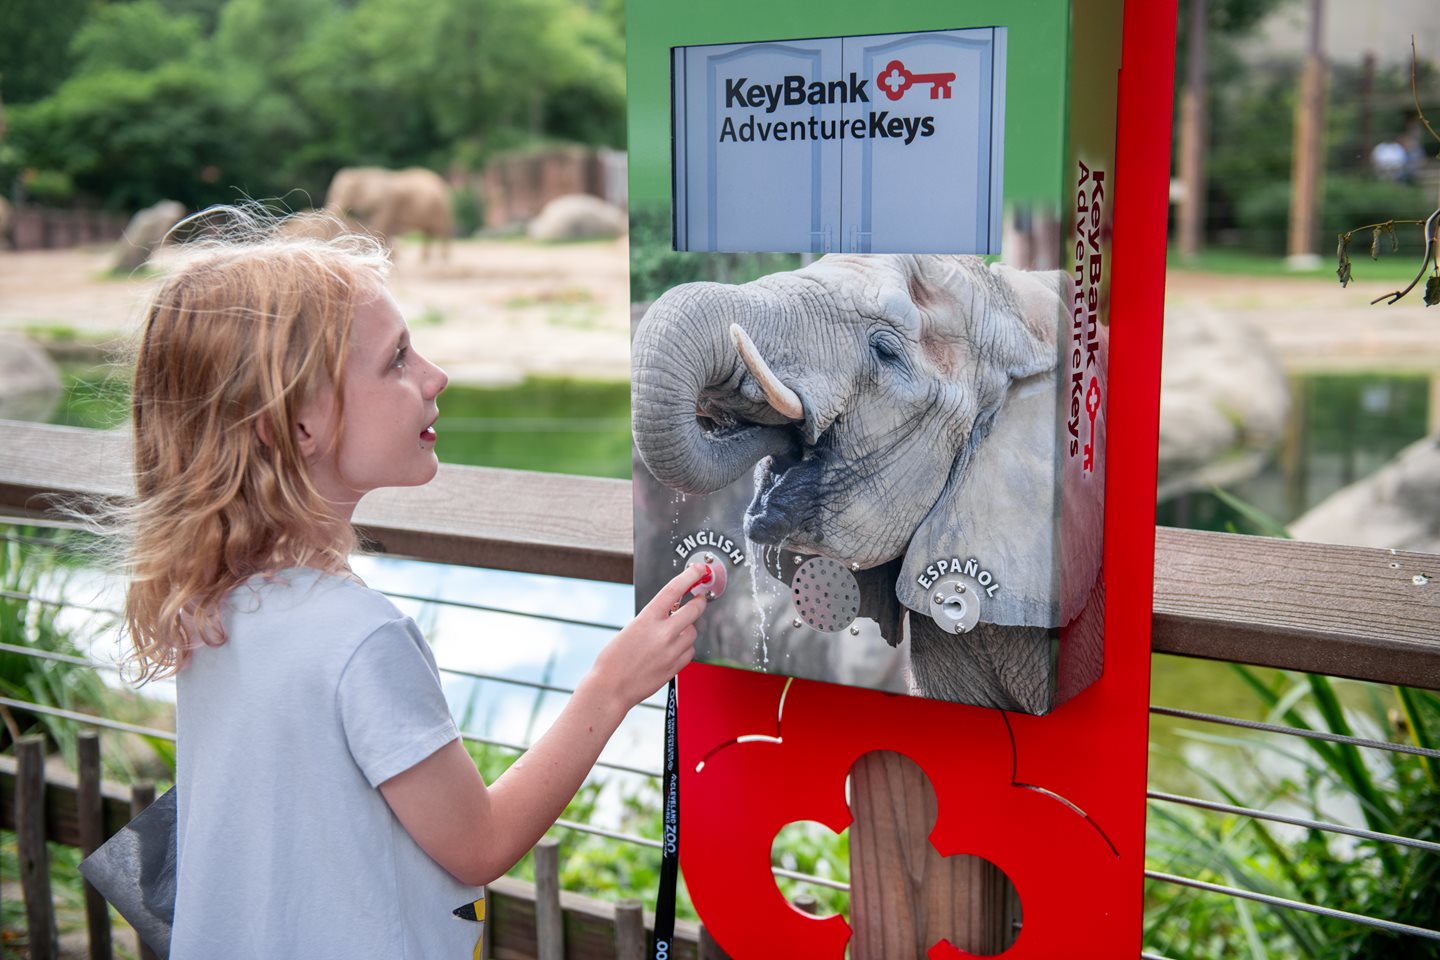 Cleveland Metroparks and KeyBank Partner to Launch AdventureKeys